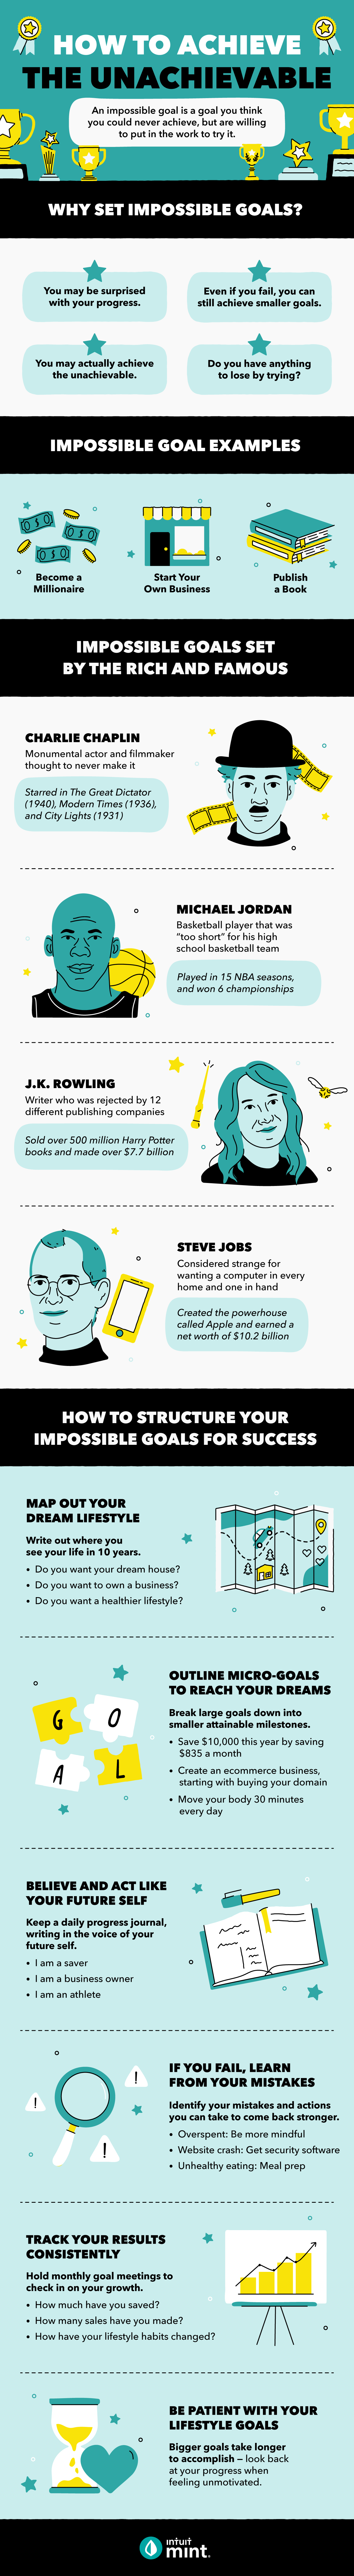 How to Achieve the Unachieveable